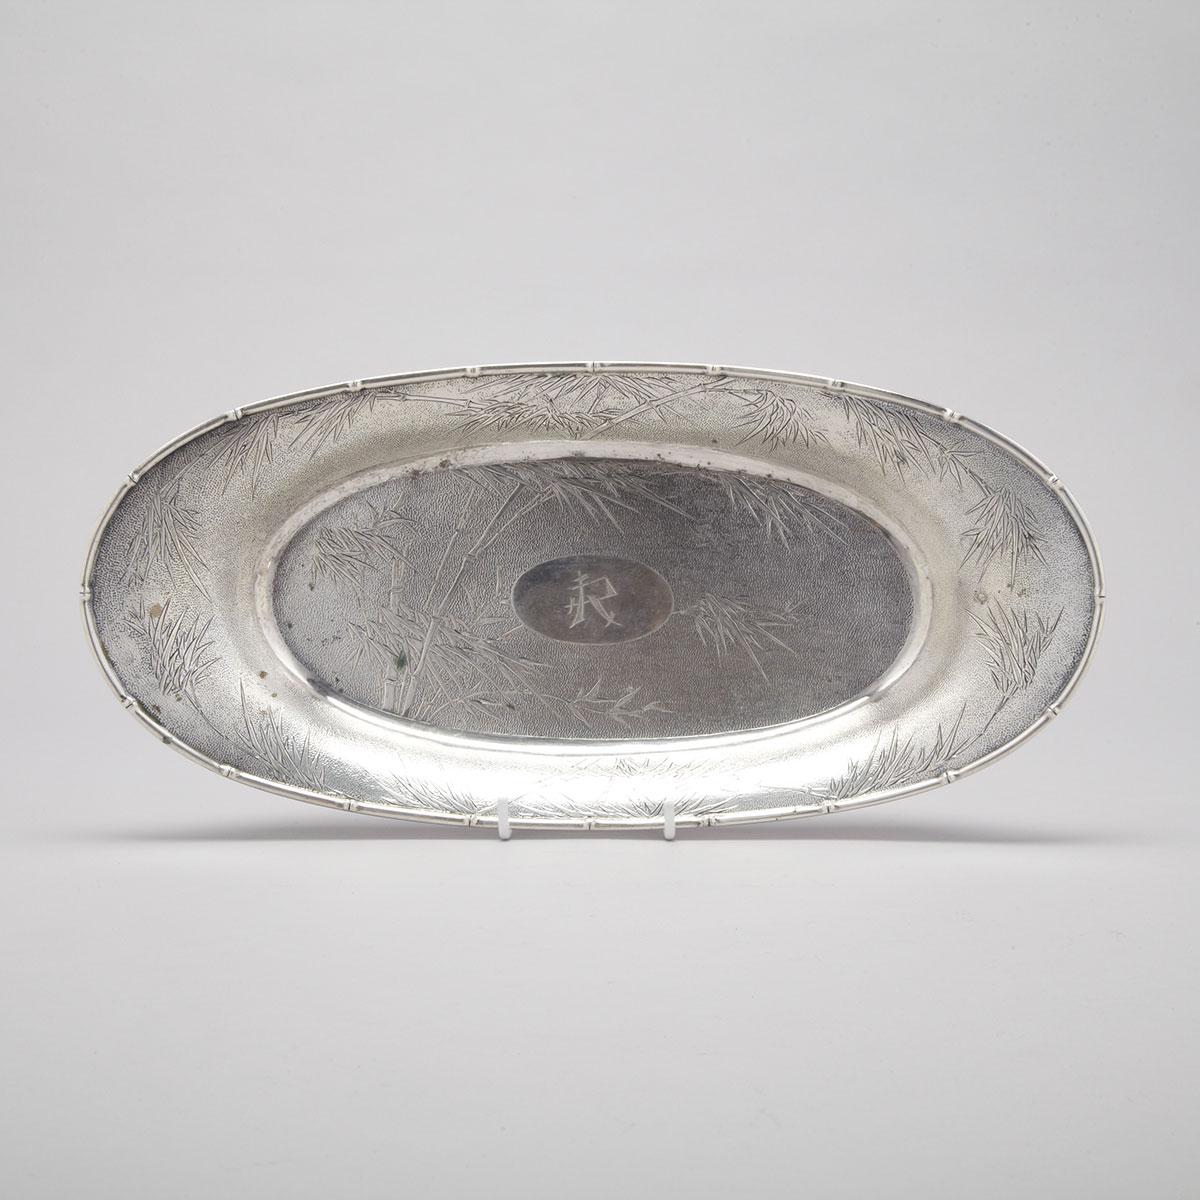 Chinese Silver Oval Bread Dish, early 20th century